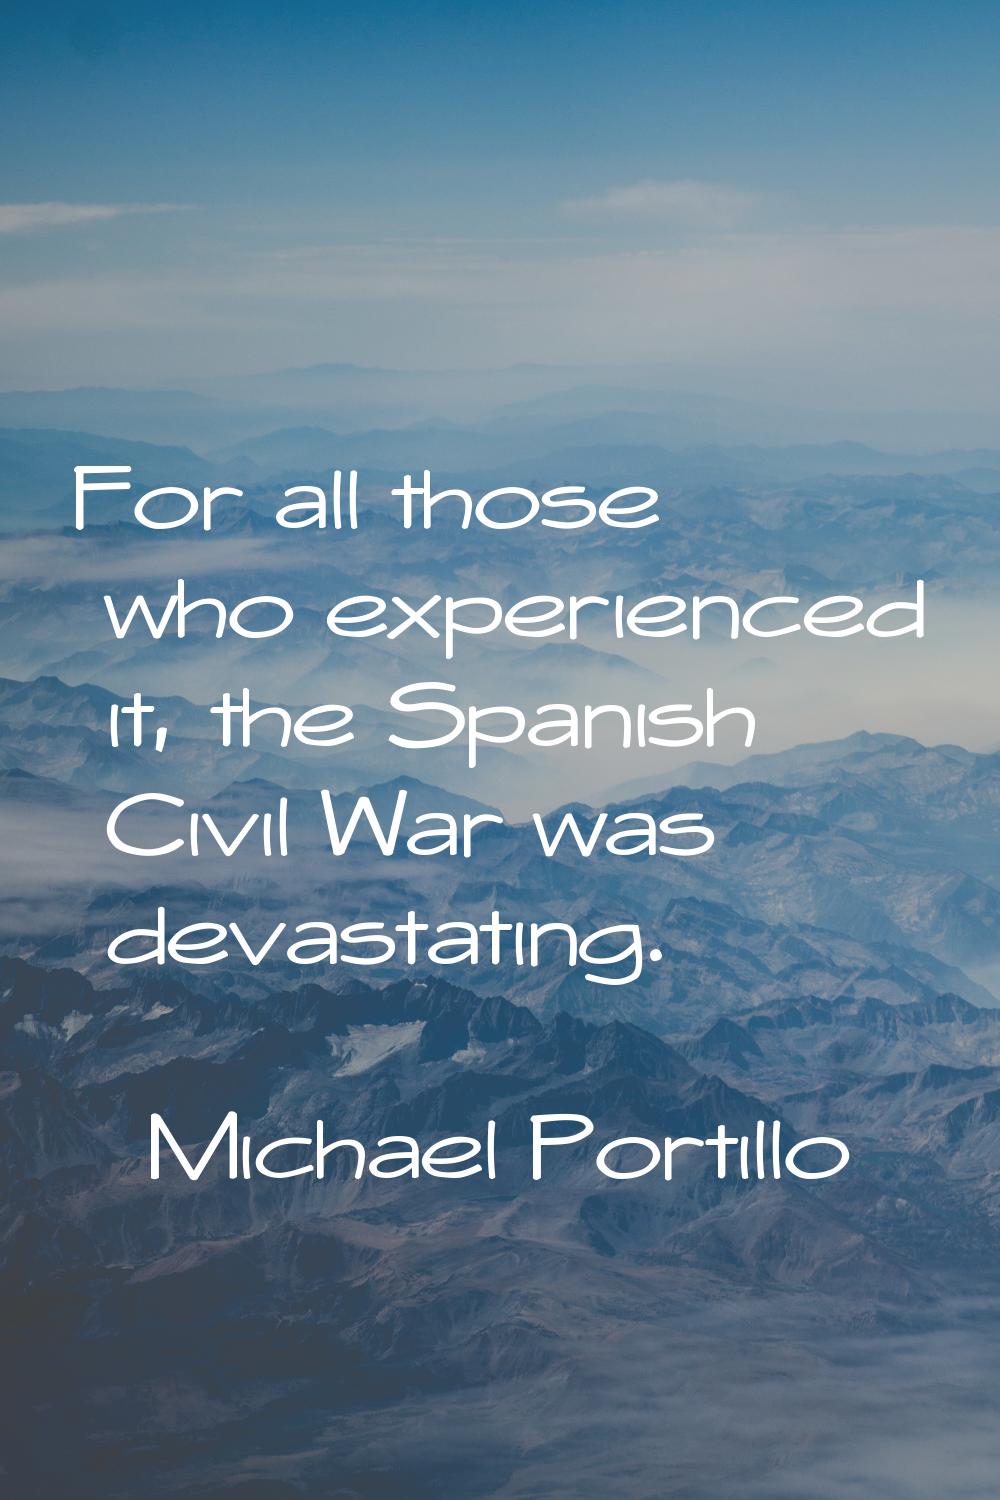 For all those who experienced it, the Spanish Civil War was devastating.